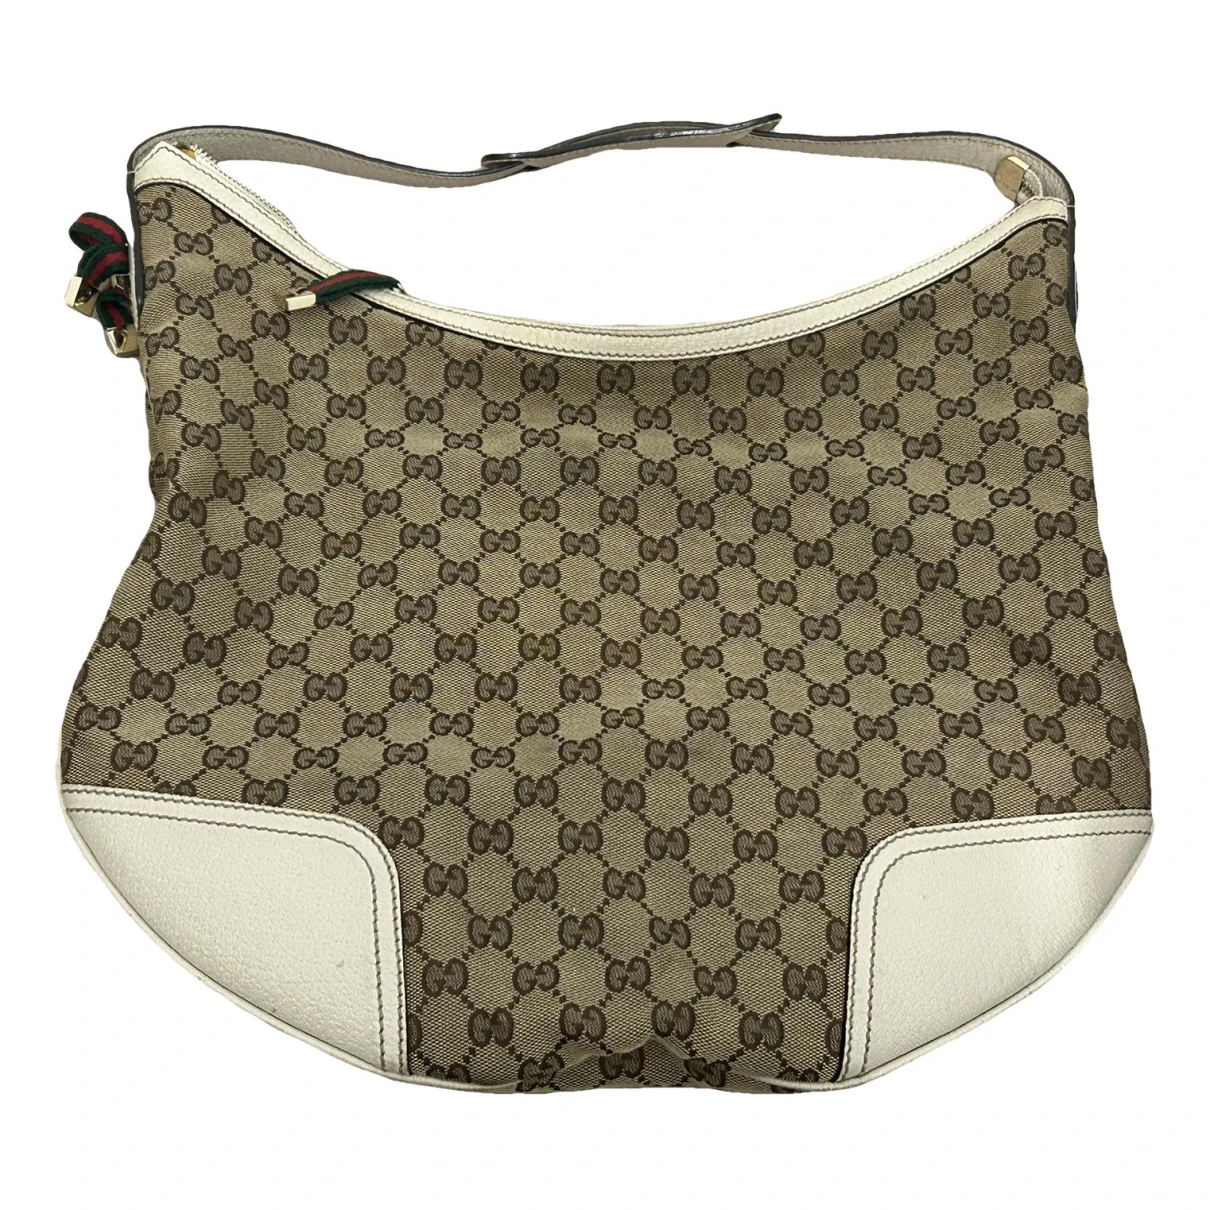 bags Gucci handbags Hobo for Female Cloth. Used condition